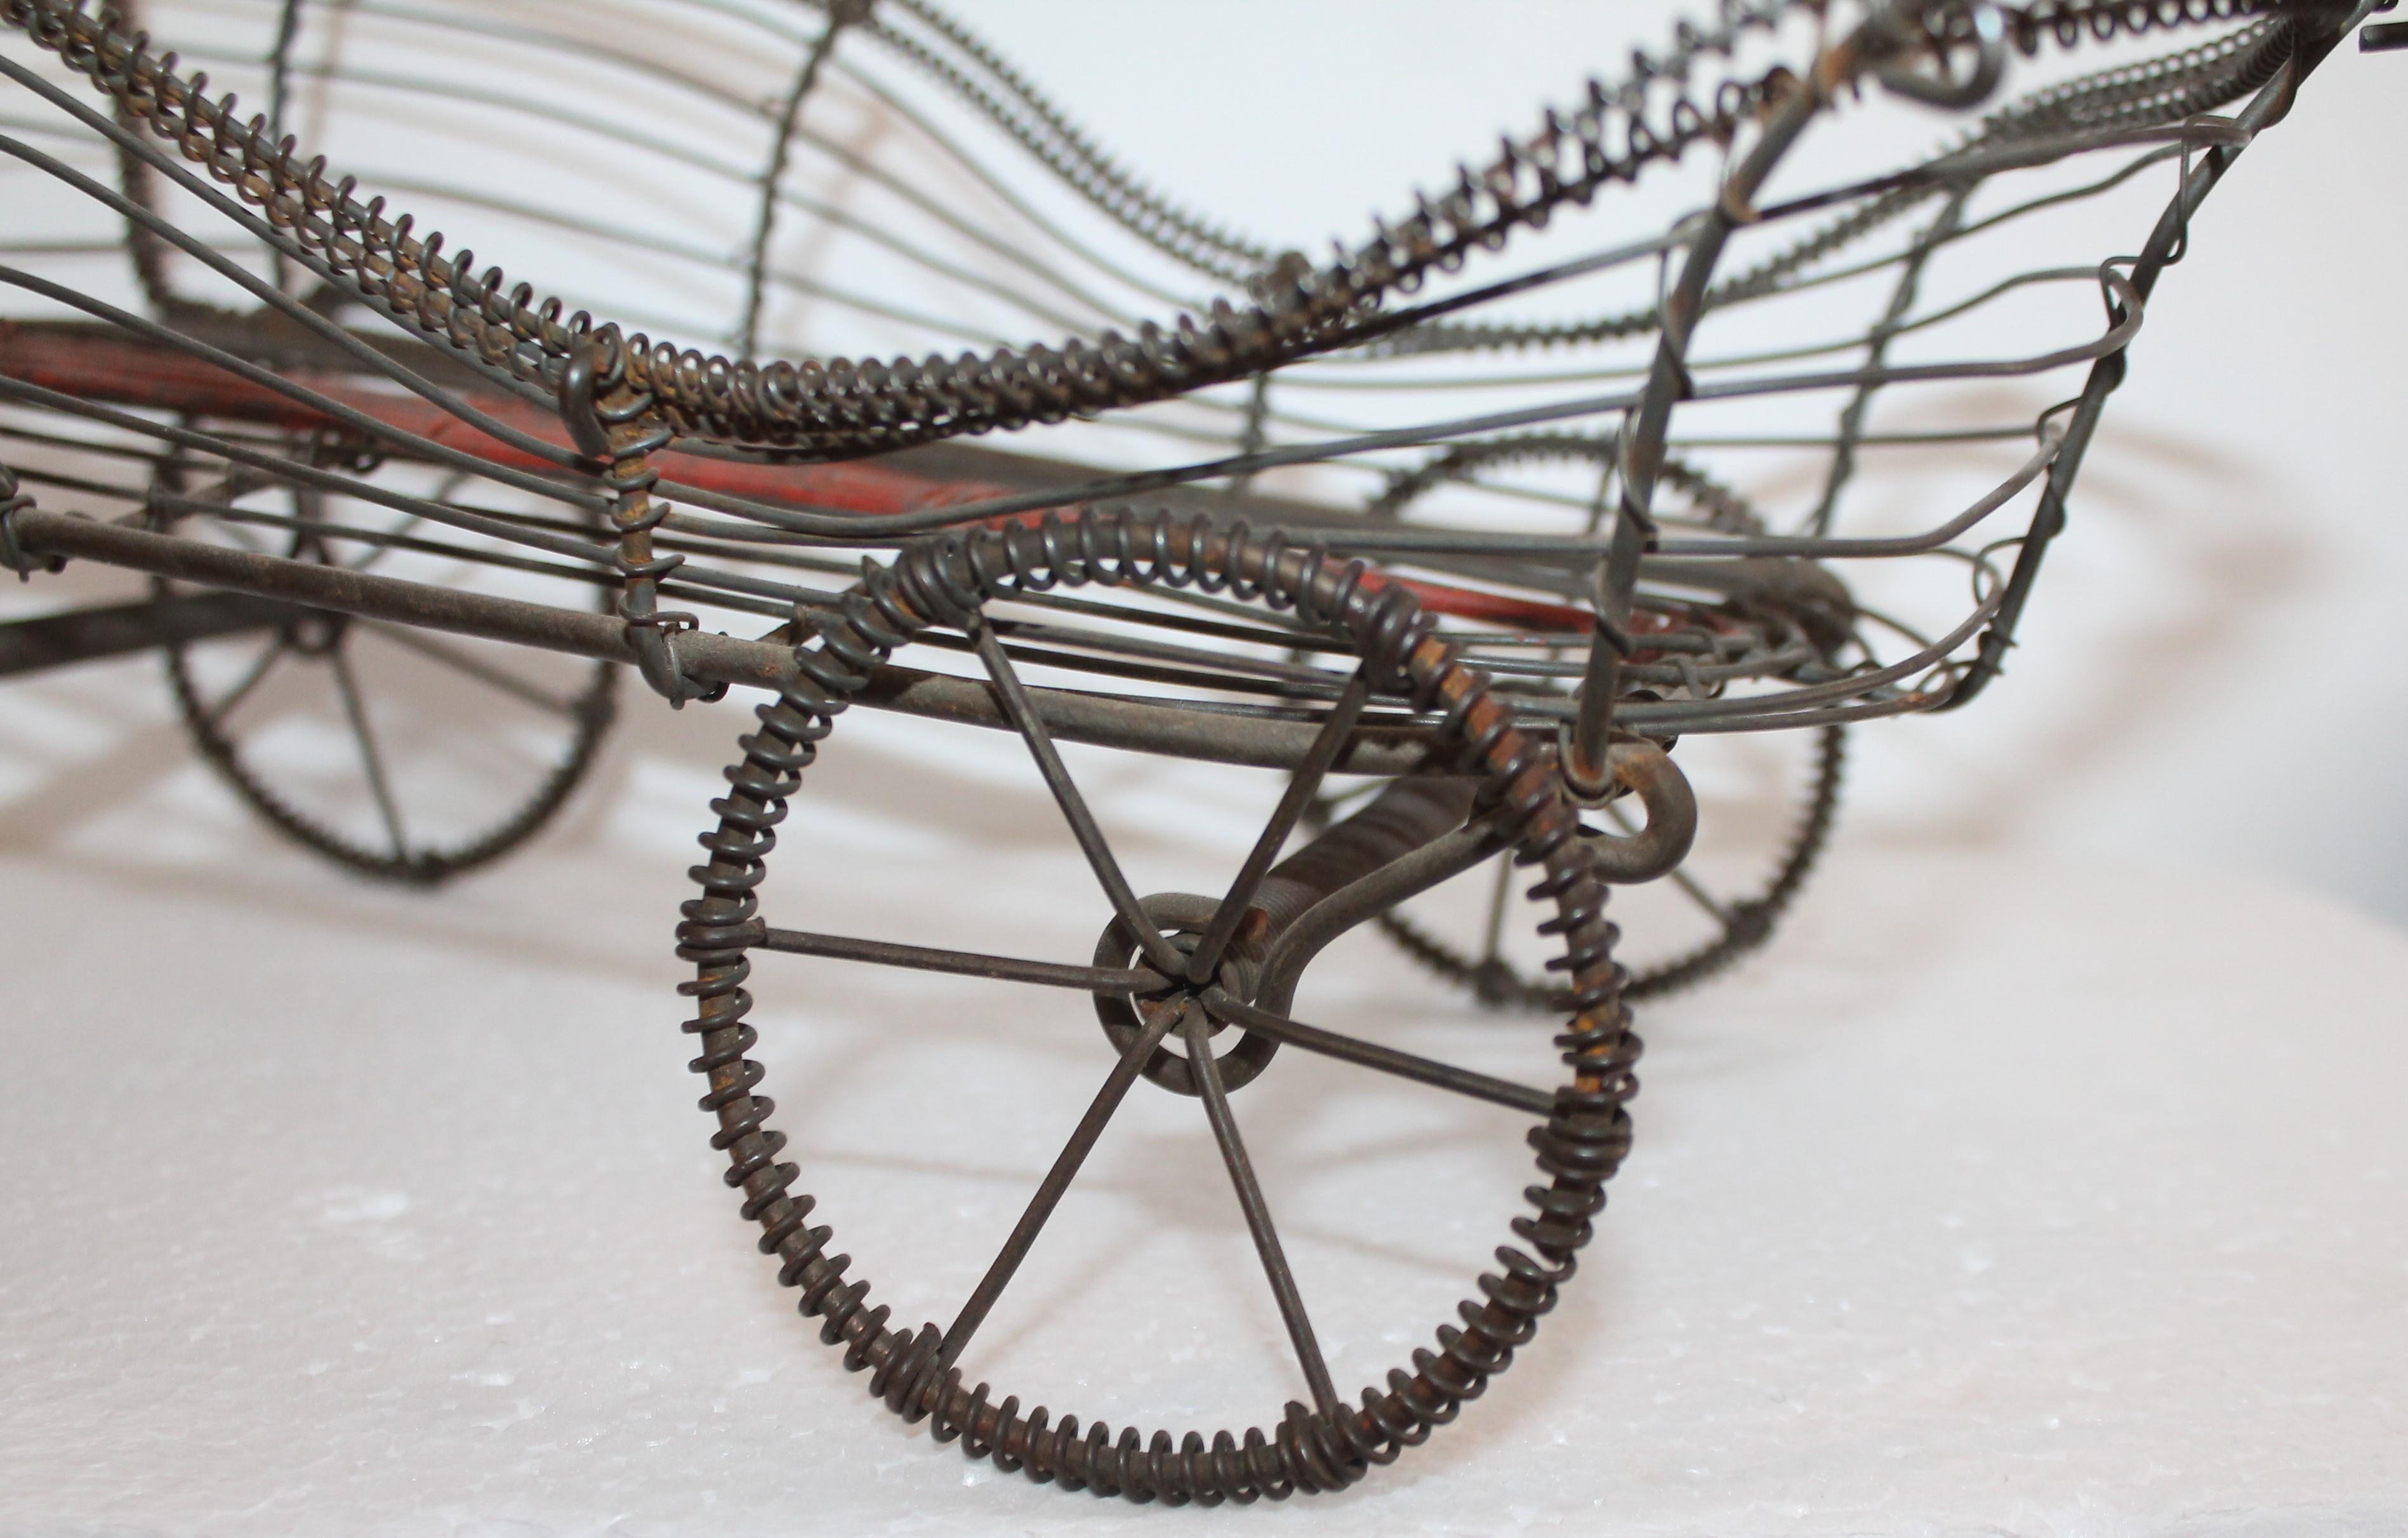 Hand-Crafted 19th Century American Wire Buggy For Sale